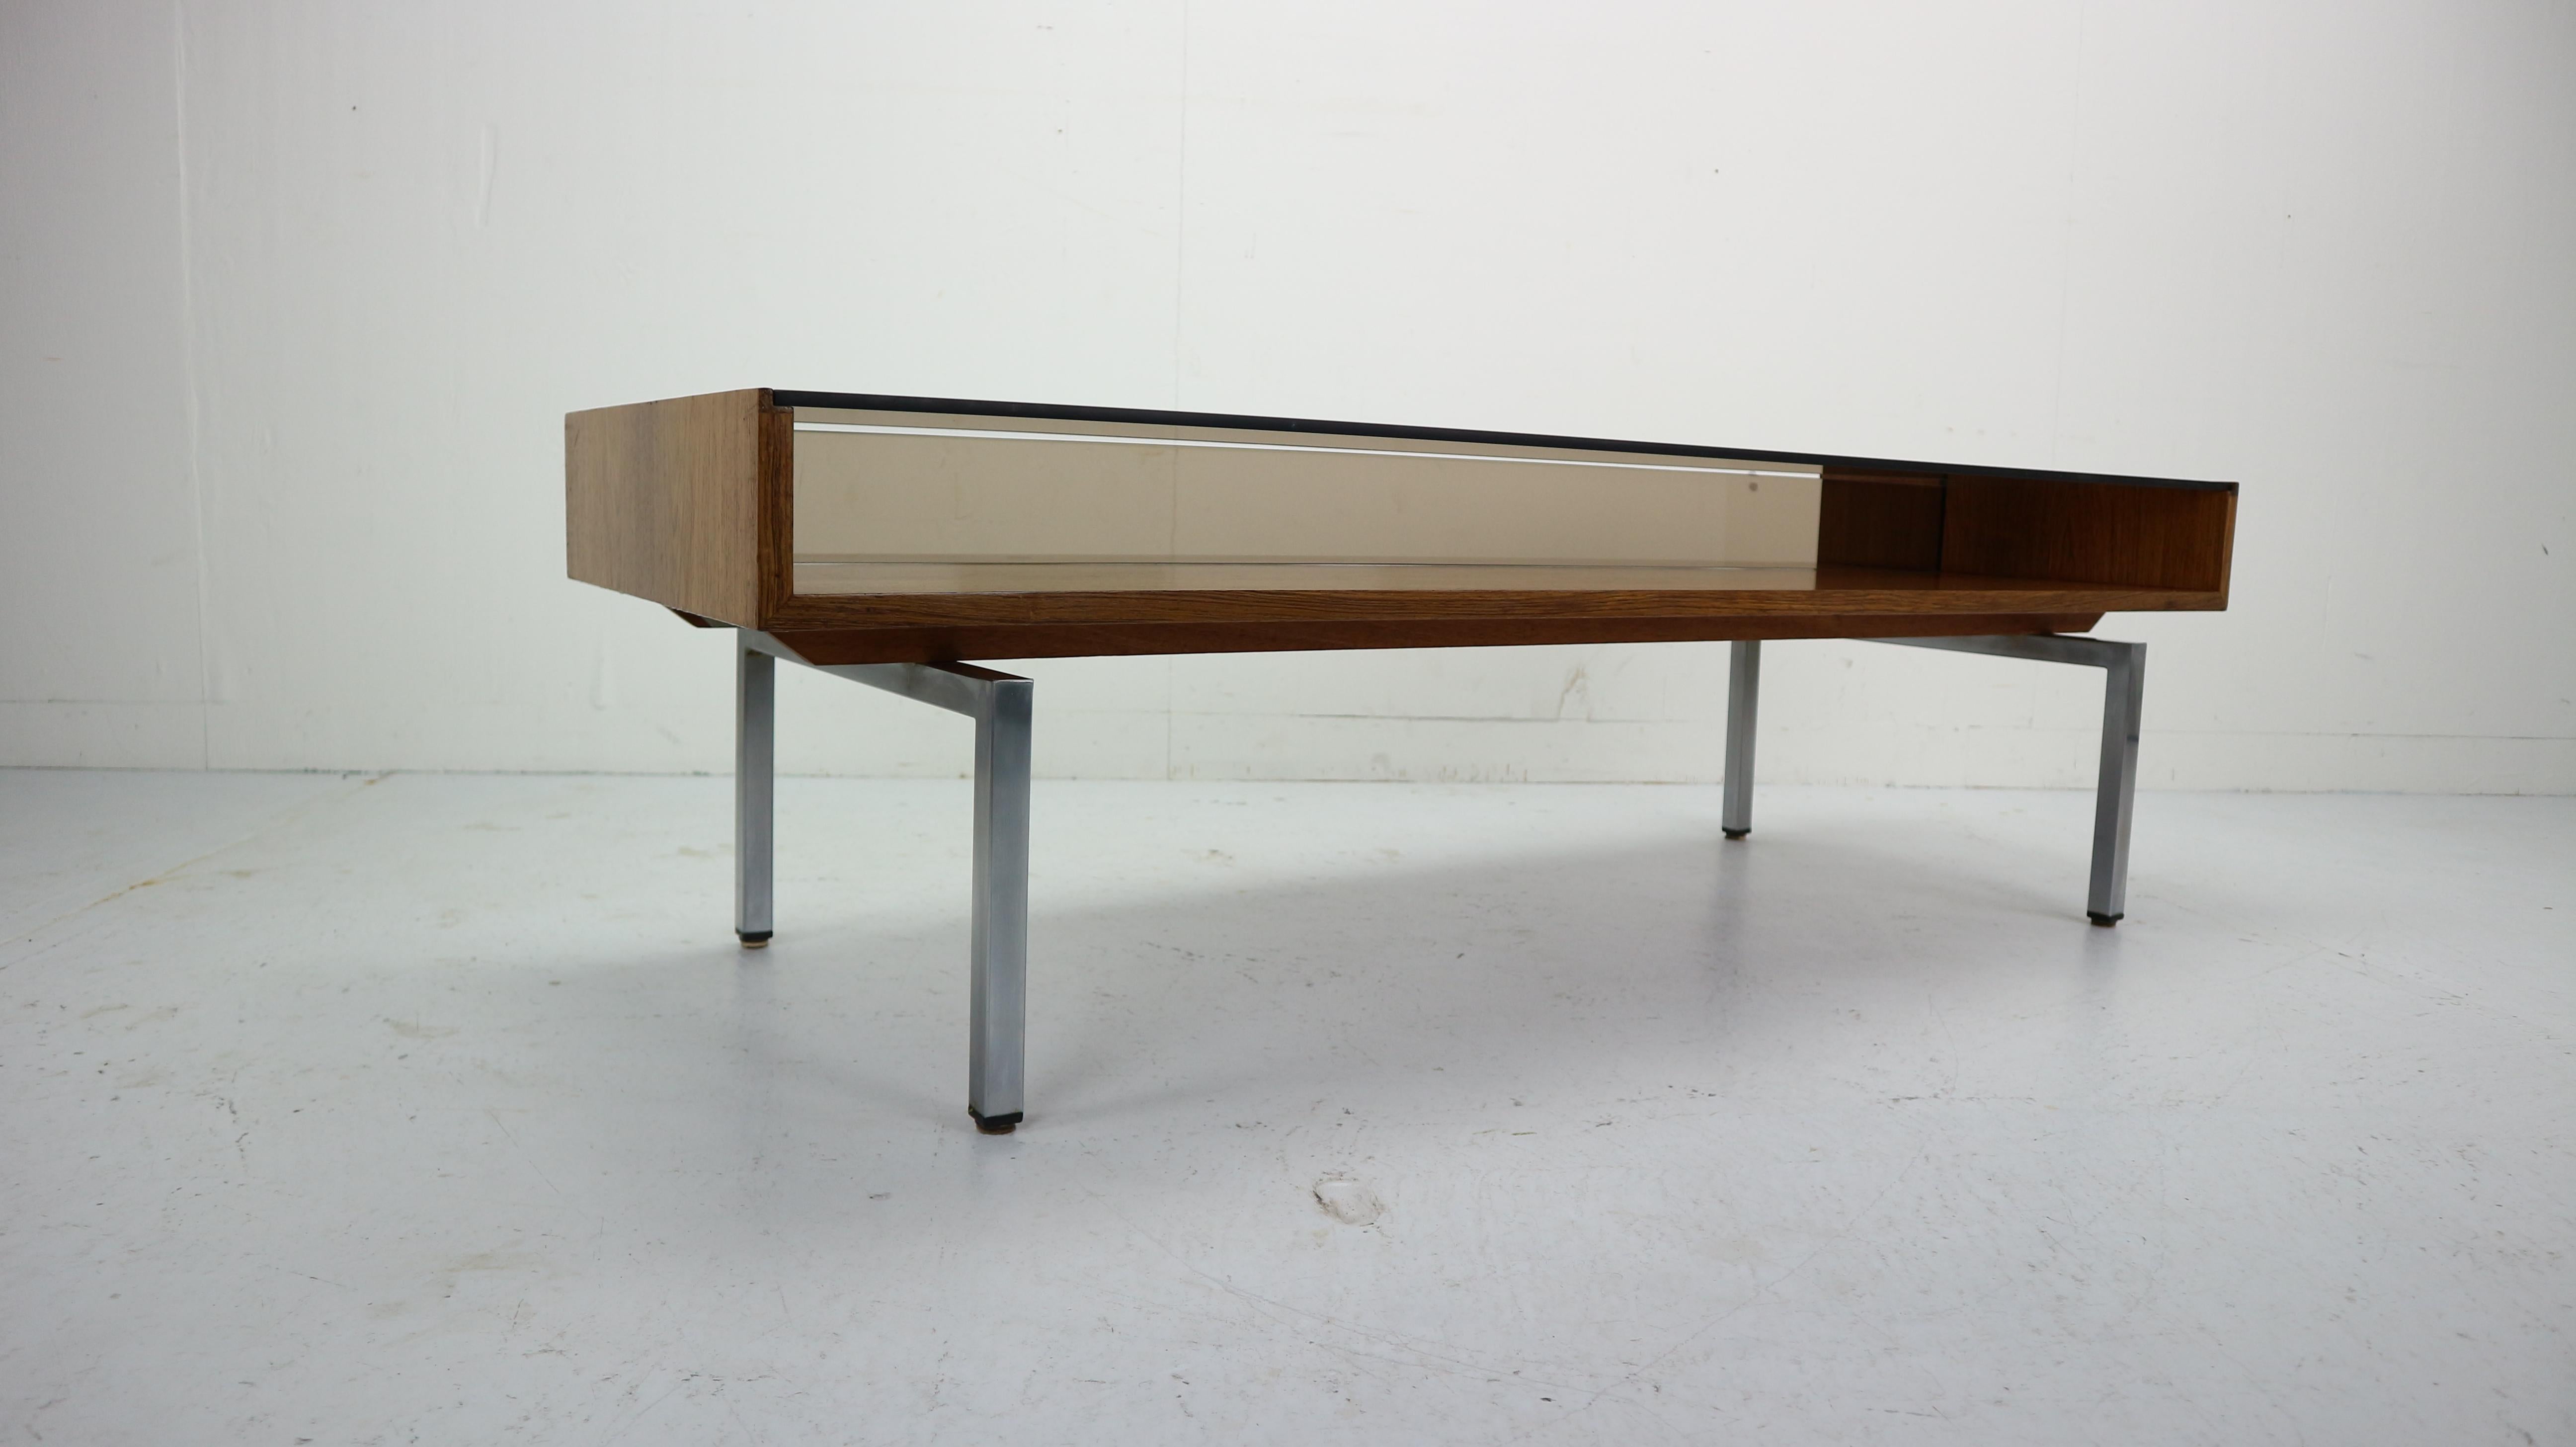 Mid-Century Modern, smoked glass, rosewood, stainless steel feet coffee table made in 1970s.
Rare and minimalistic Dutch design.
Has some magazine (storage space) under the table.
Due to cities regulations the shipping is available only inside